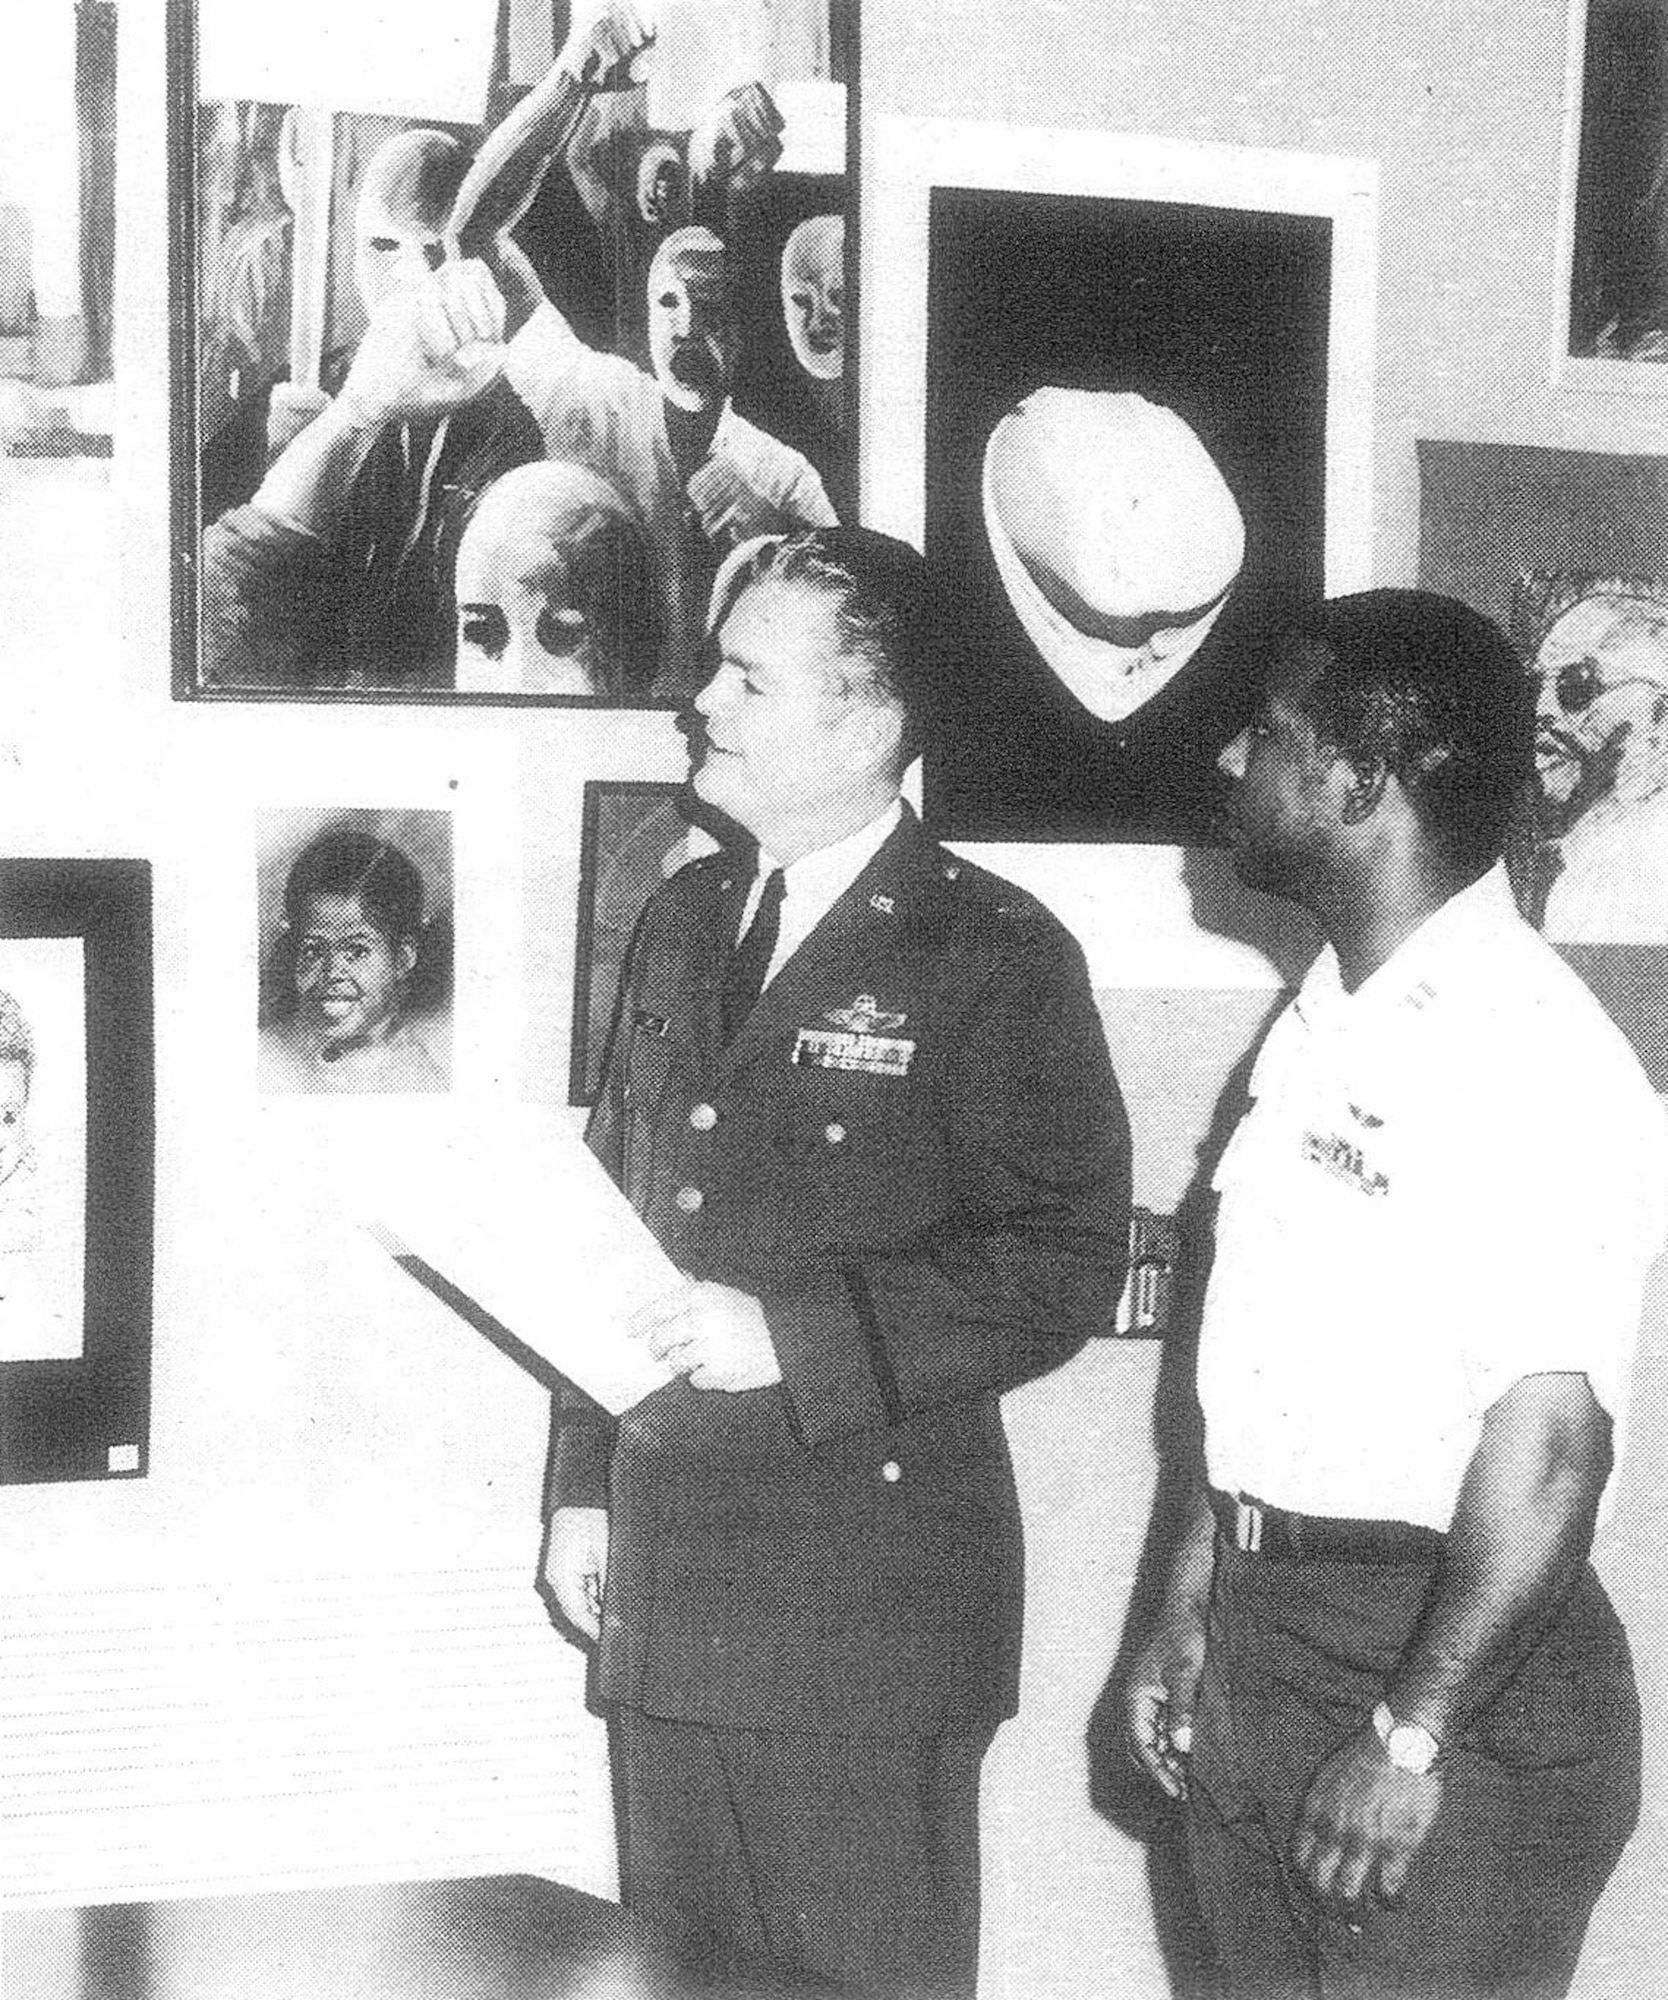 BARKSDALE Air Force Base, La –Barksdale has celebrated Black History Month since the early 1970s, but the study and celebration of Black Americans’ rich cultural heritage, triumphs and adversities is nearly a century old.